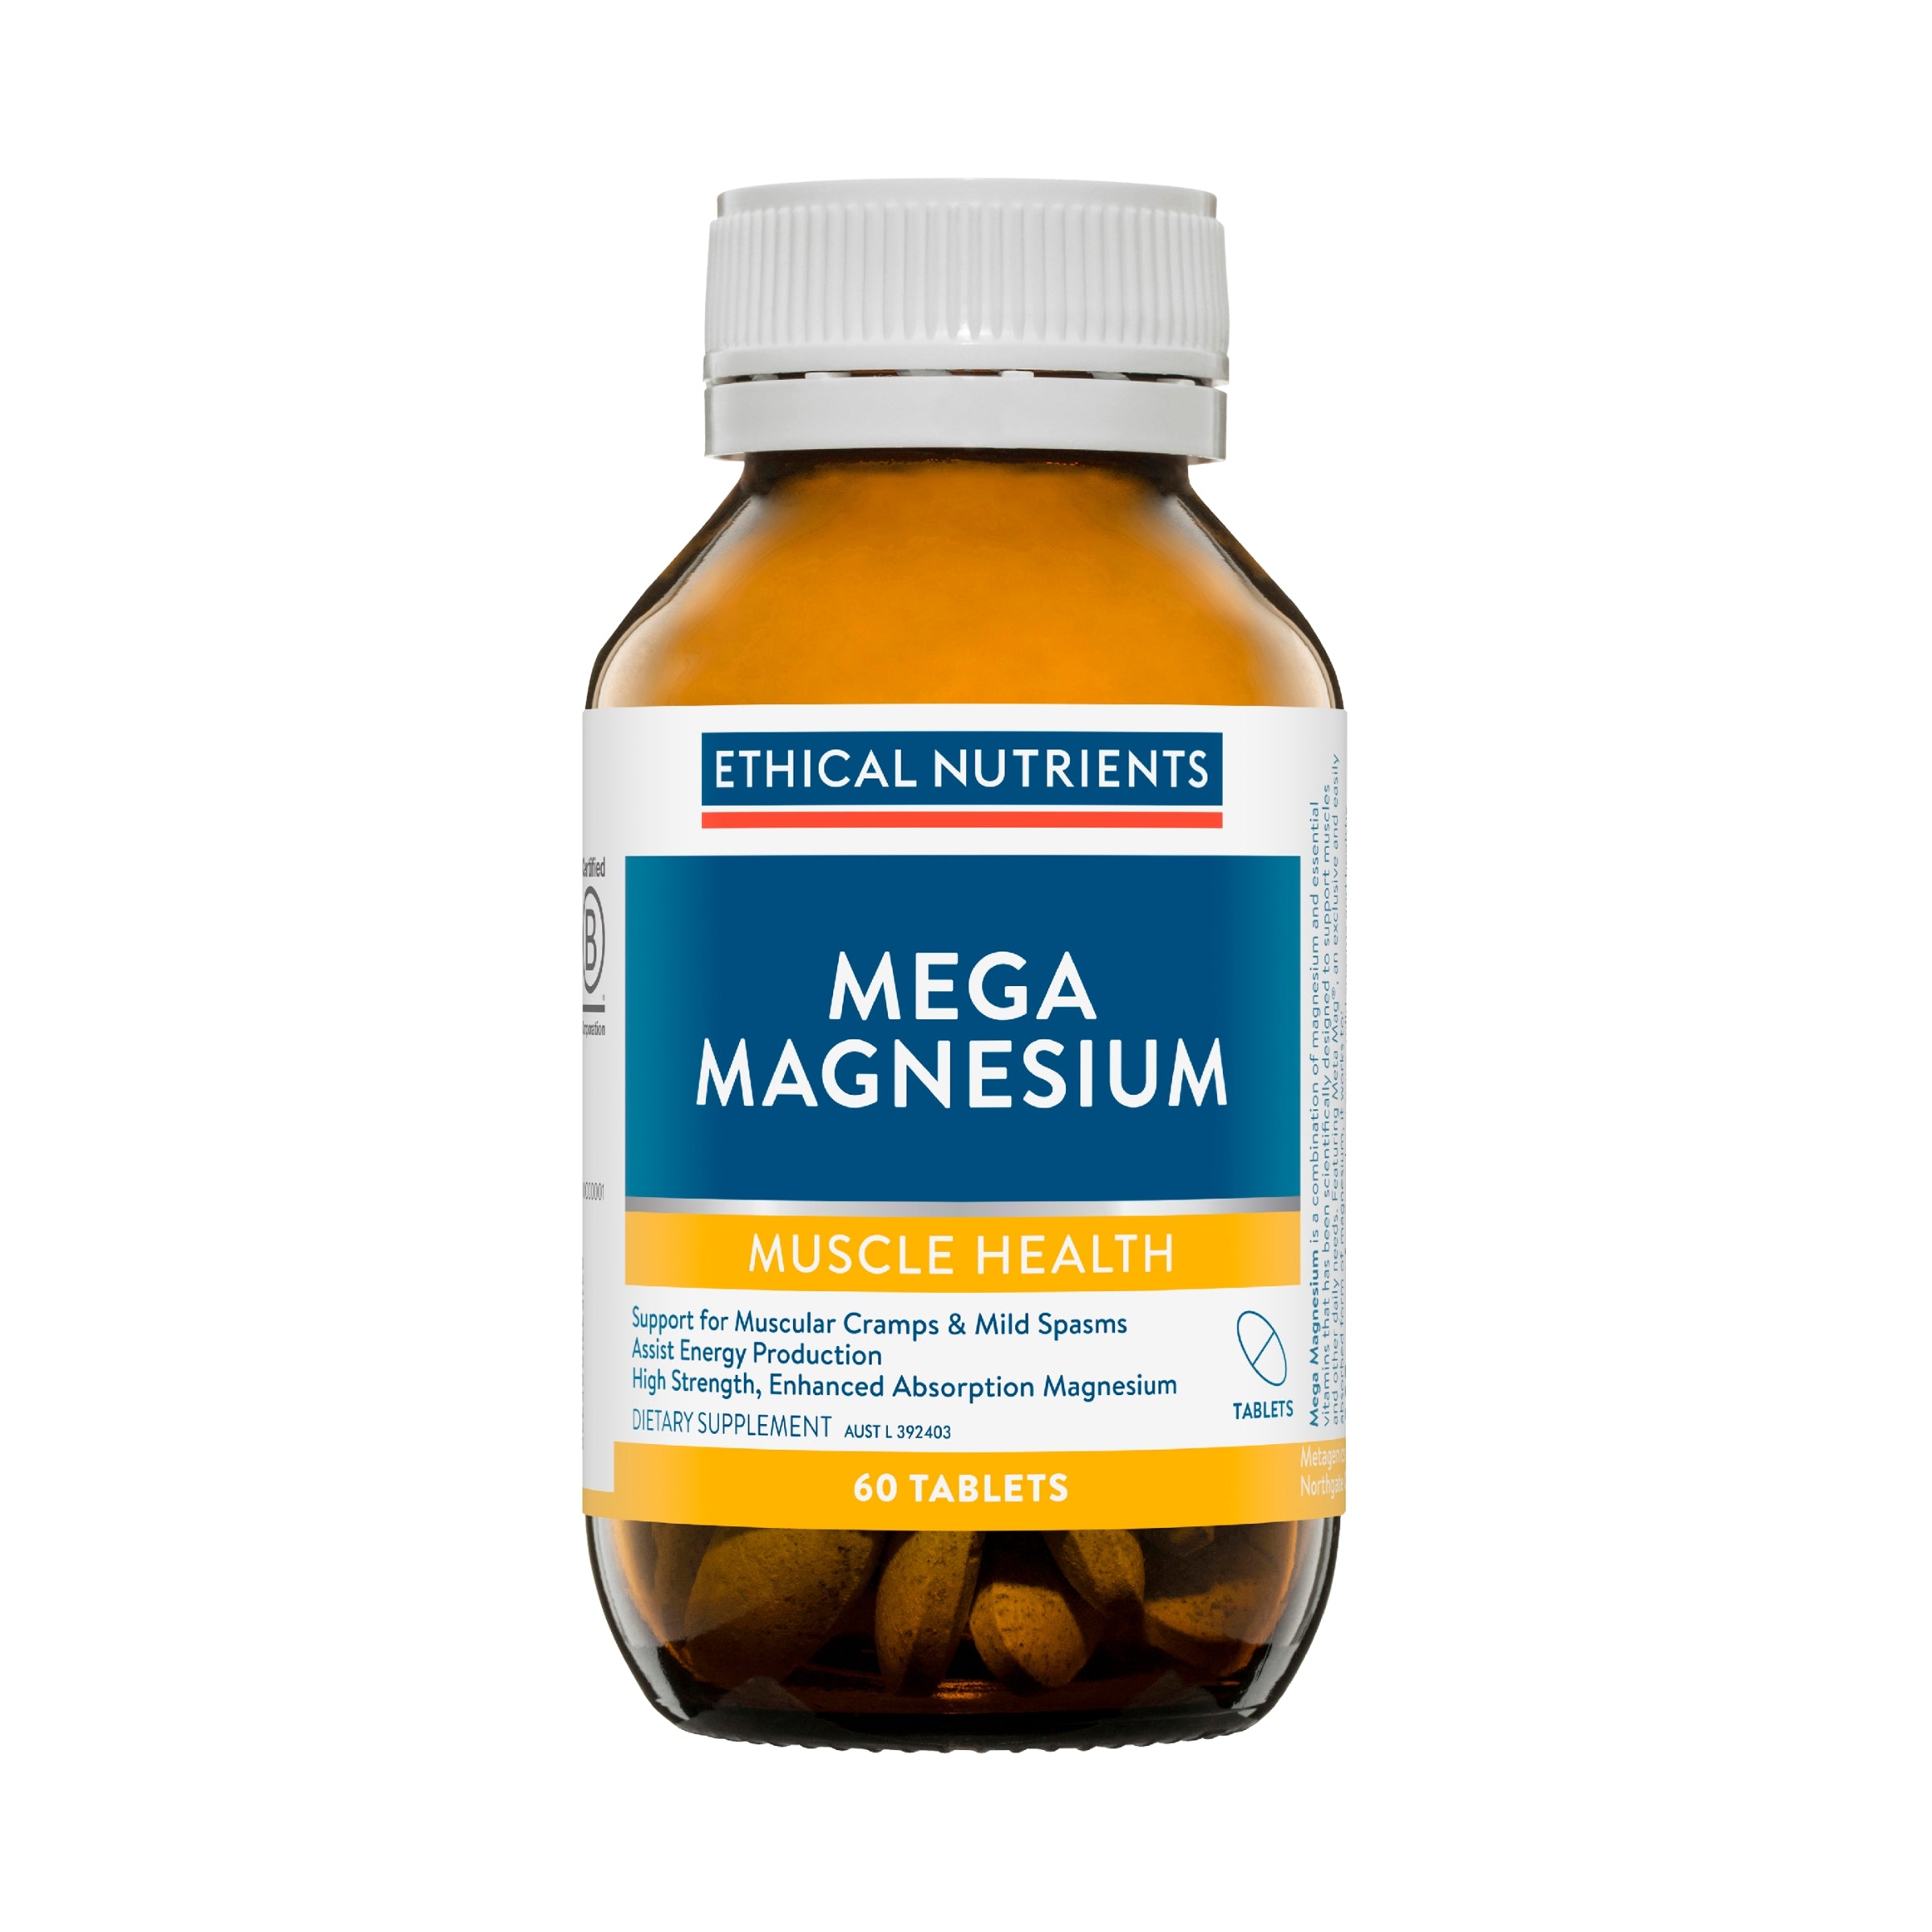 Ethical Nutrients Mega Magnesium 60 Tablets #size_60 tablets